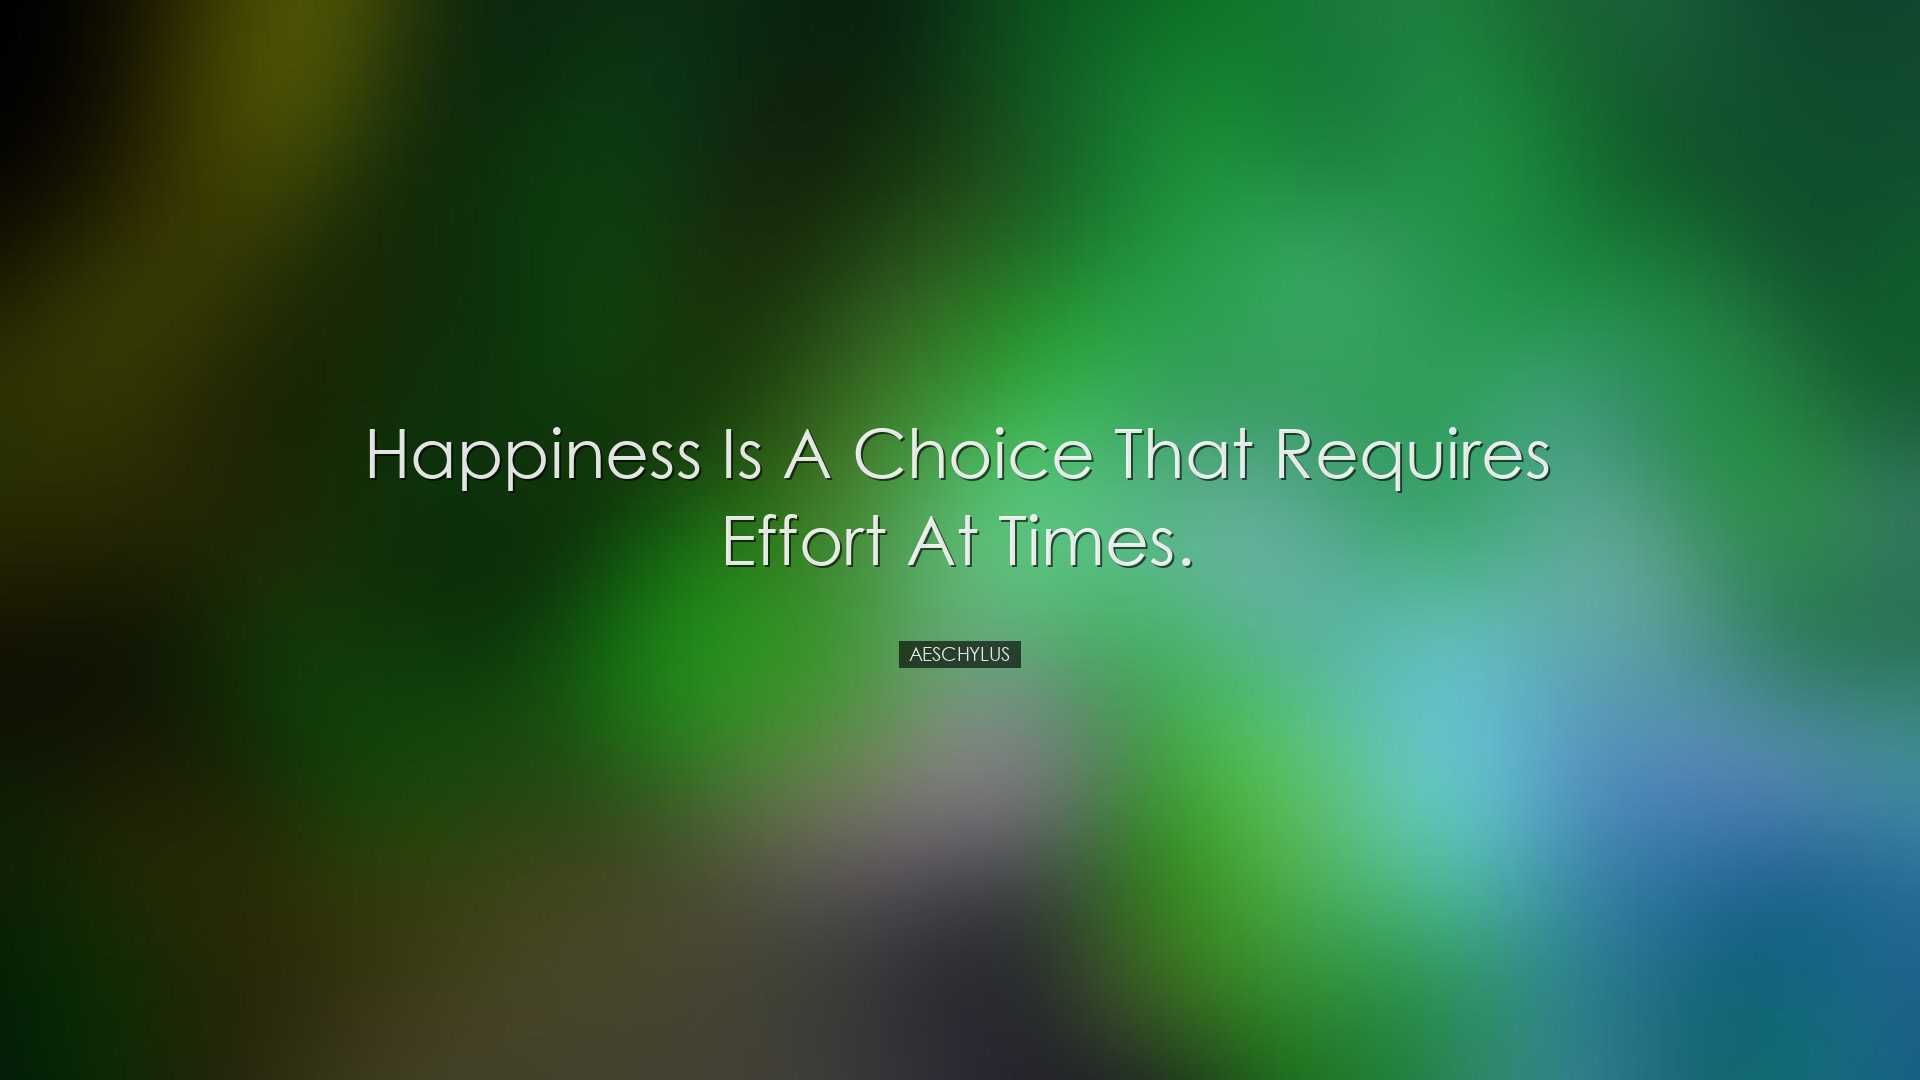 Happiness is a choice that requires effort at times. - Aeschylus